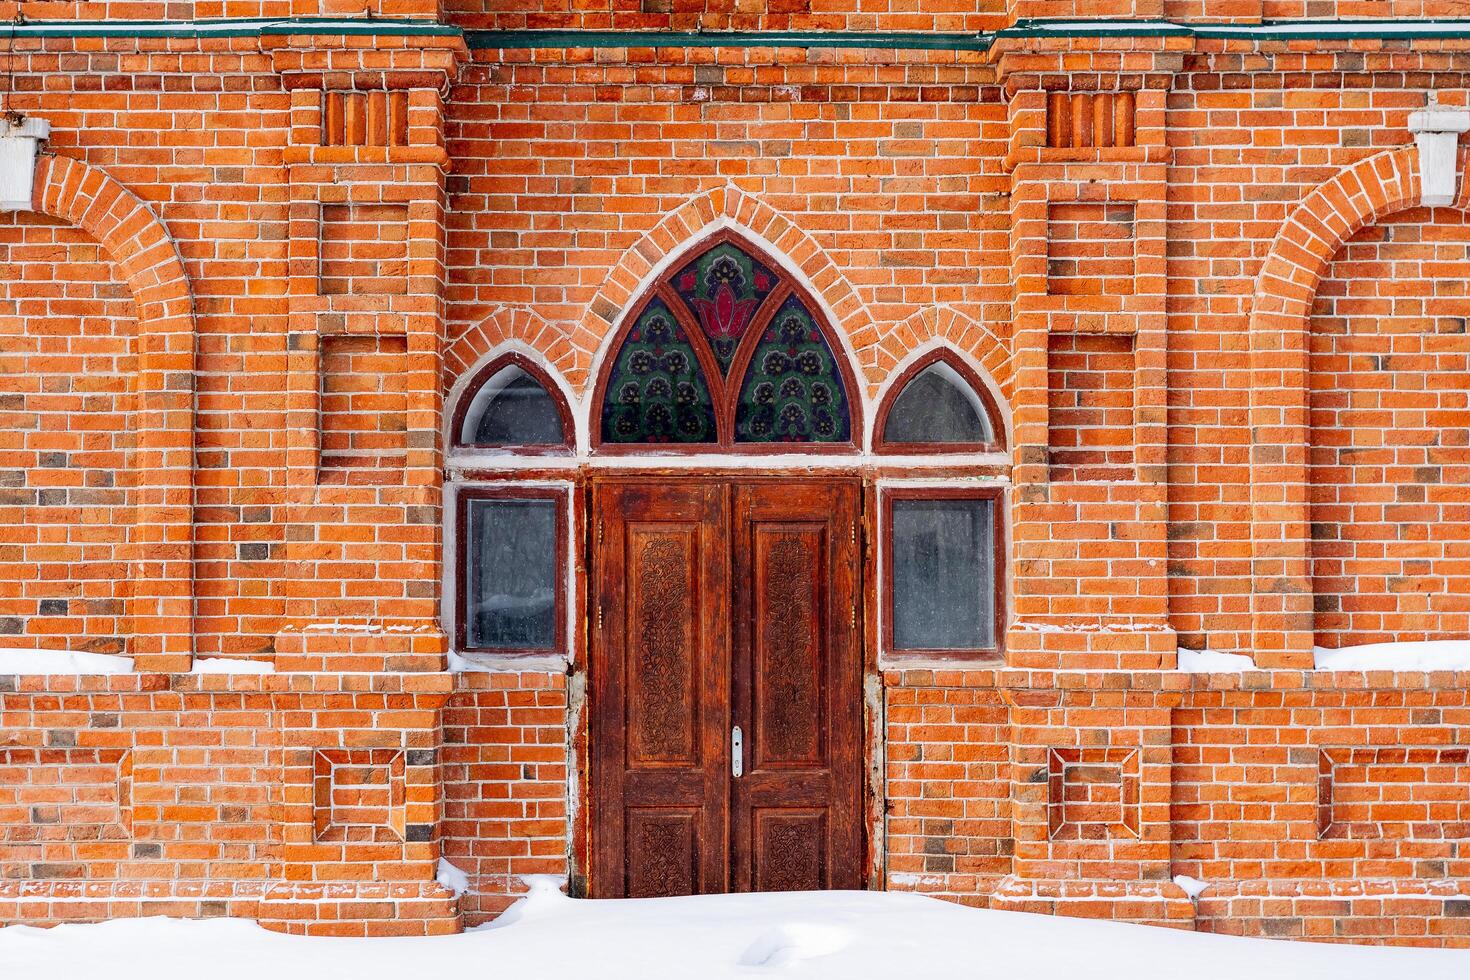 Entrance to a brick building. Arched windows and doors. Heavy wooden door and stained glass windows. Snowdrifts in front of the entrance photo